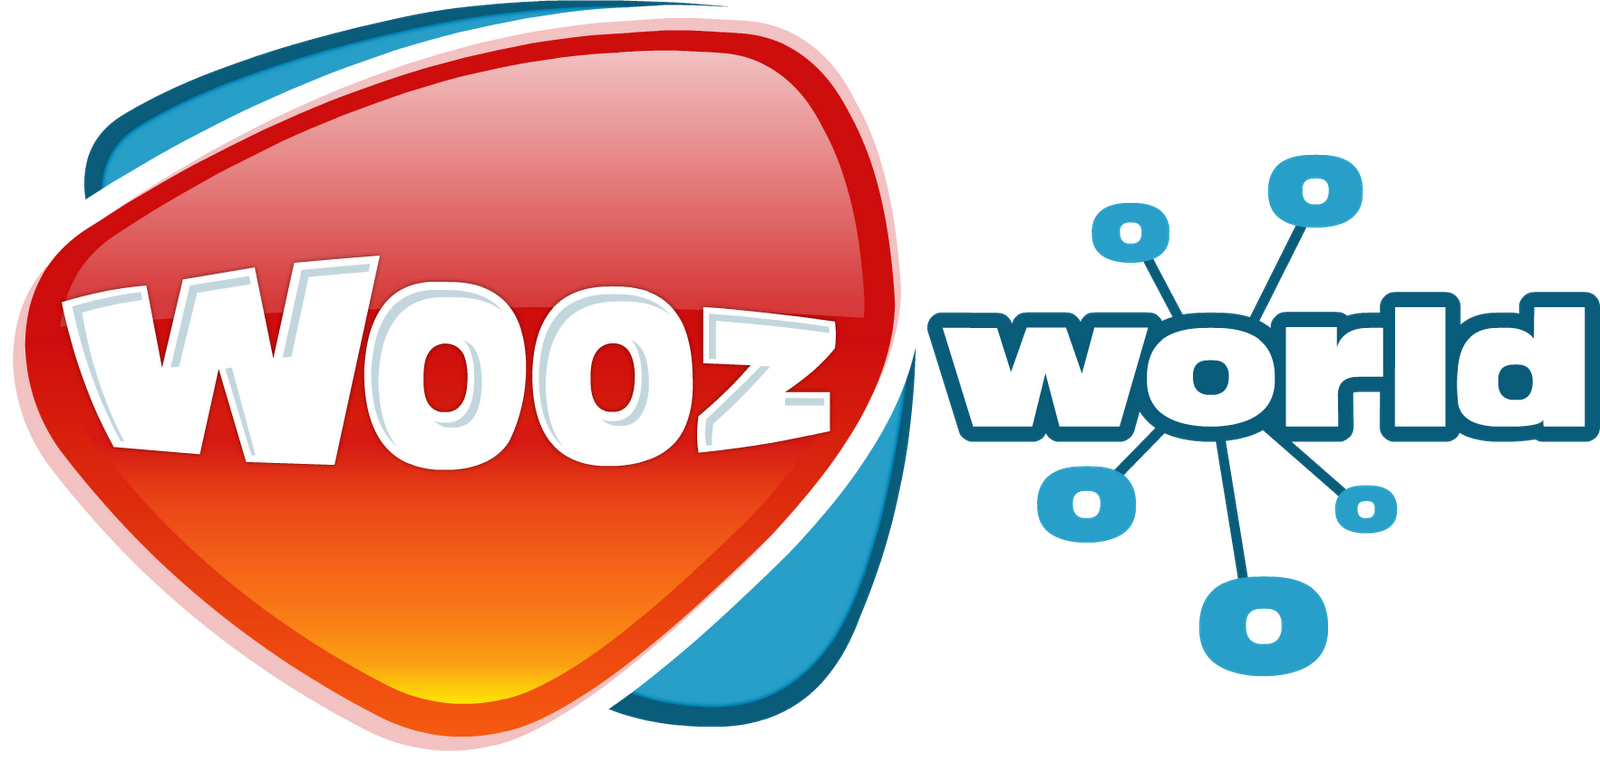 Woozworld Ultimate Wooz And Beex Hack V 2 Free Download